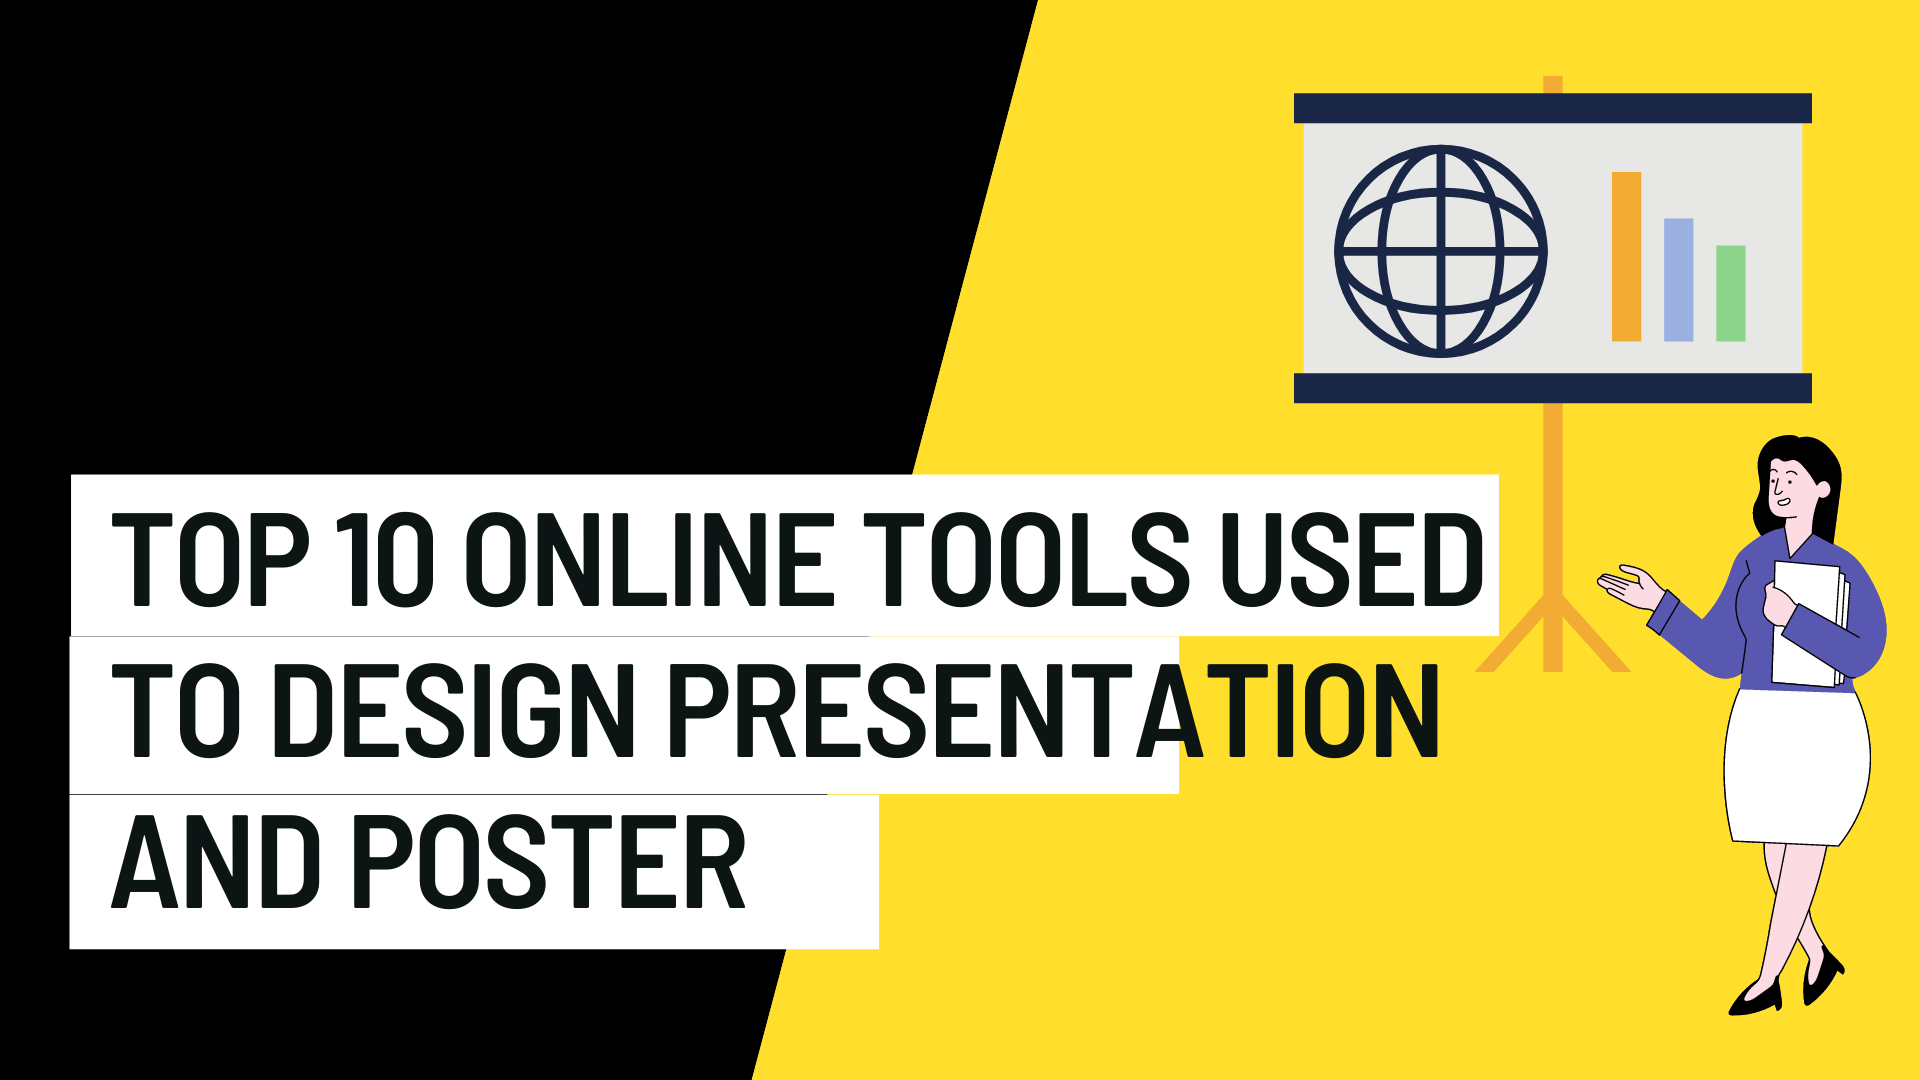 Top 10 Online Tools used to Design Presentation and Poster